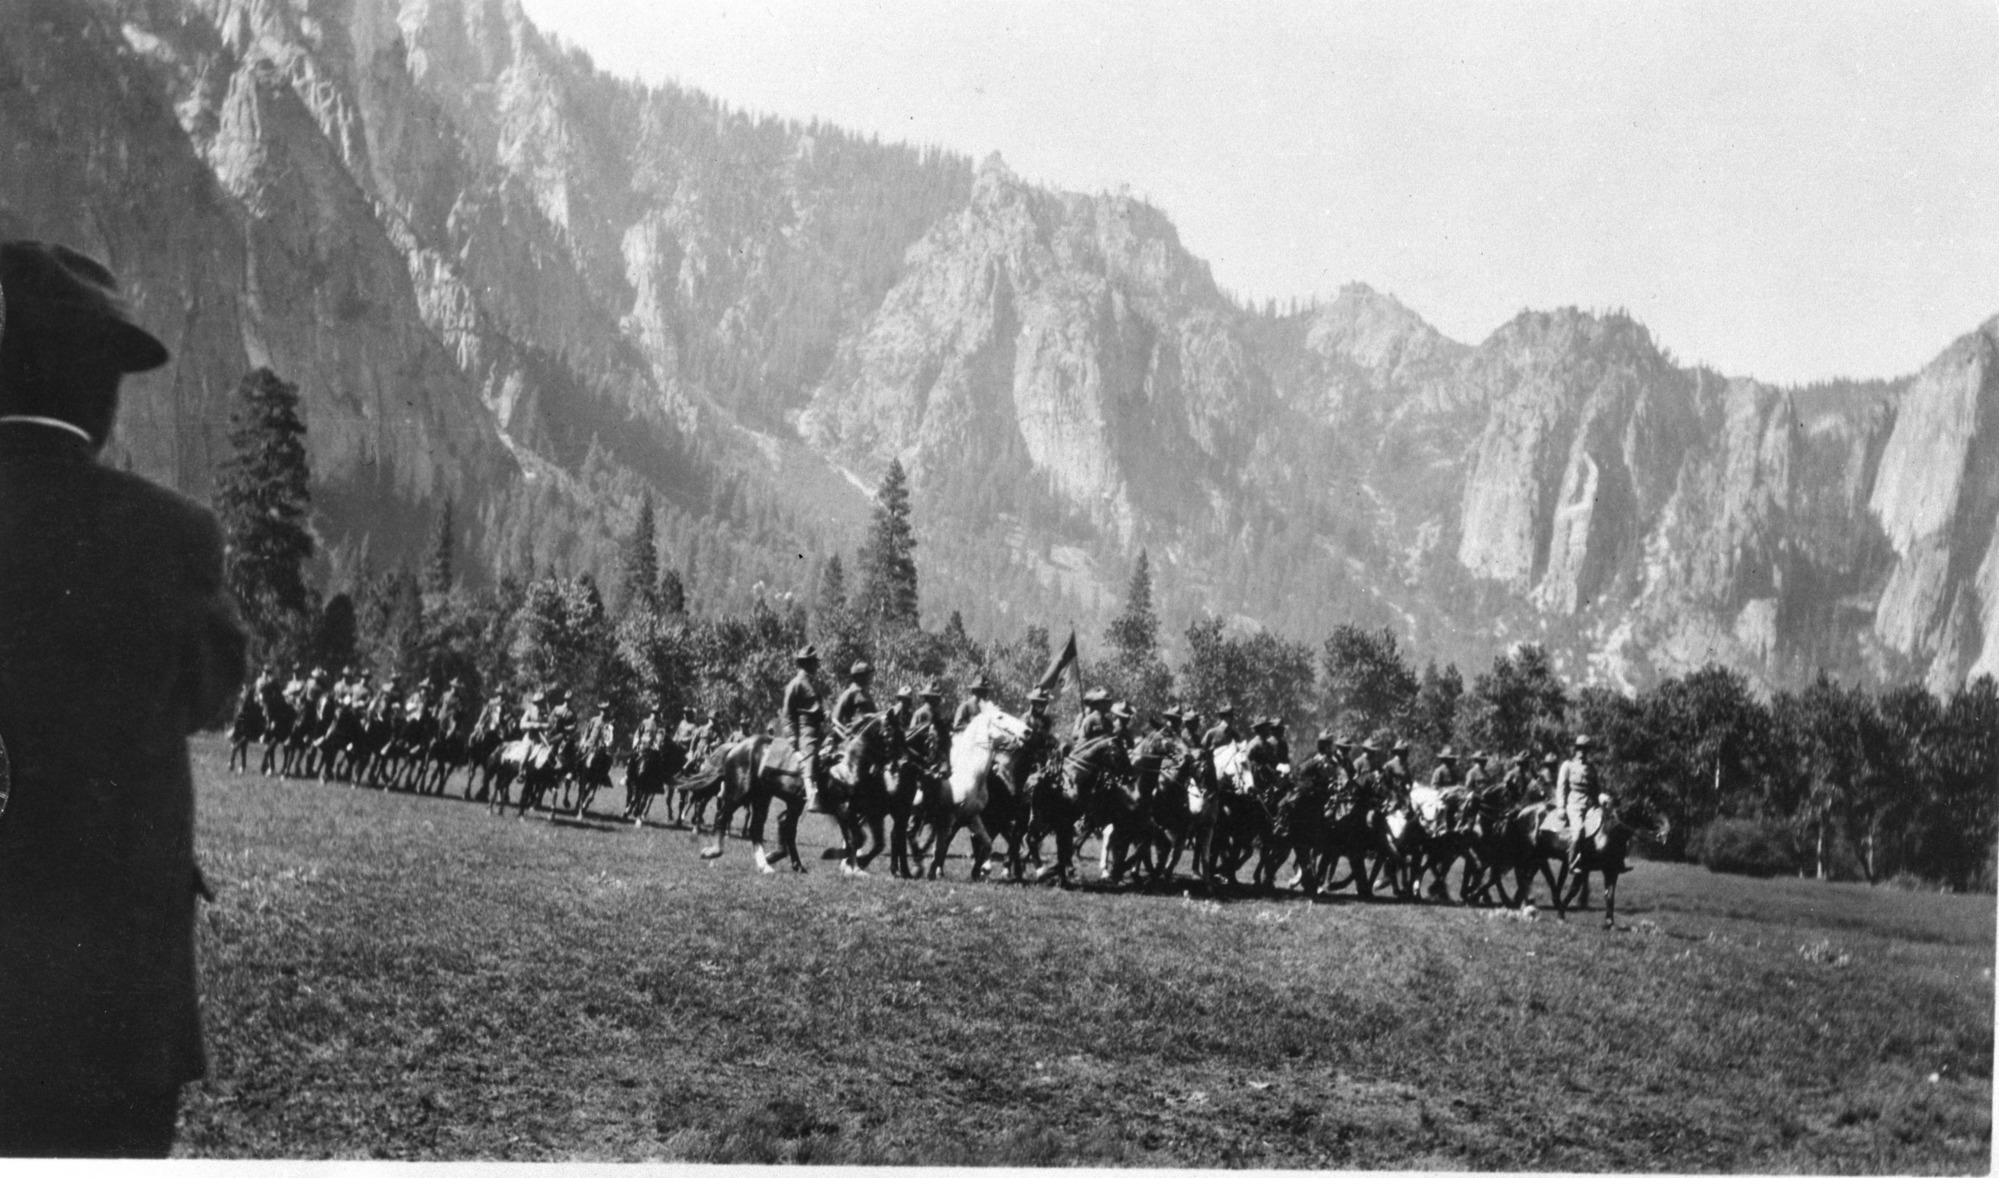 Army in Yosemite Valley.